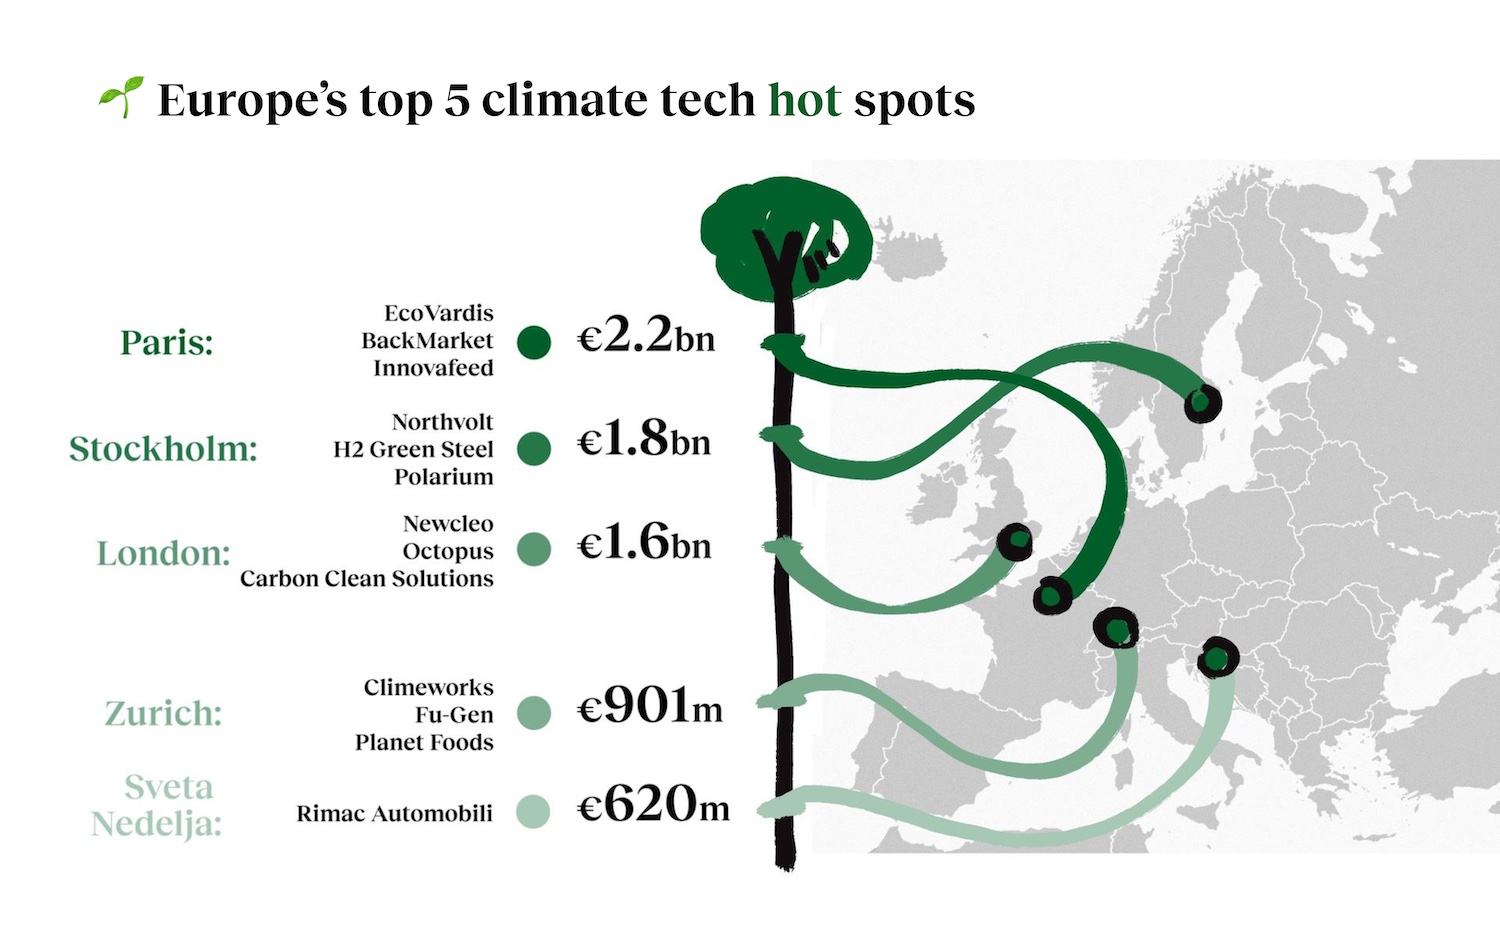 A graphic showing Europe's 5 top cities for climate tech investment: Paris, Stockholm, London, Zurich and Sveta Nedelja